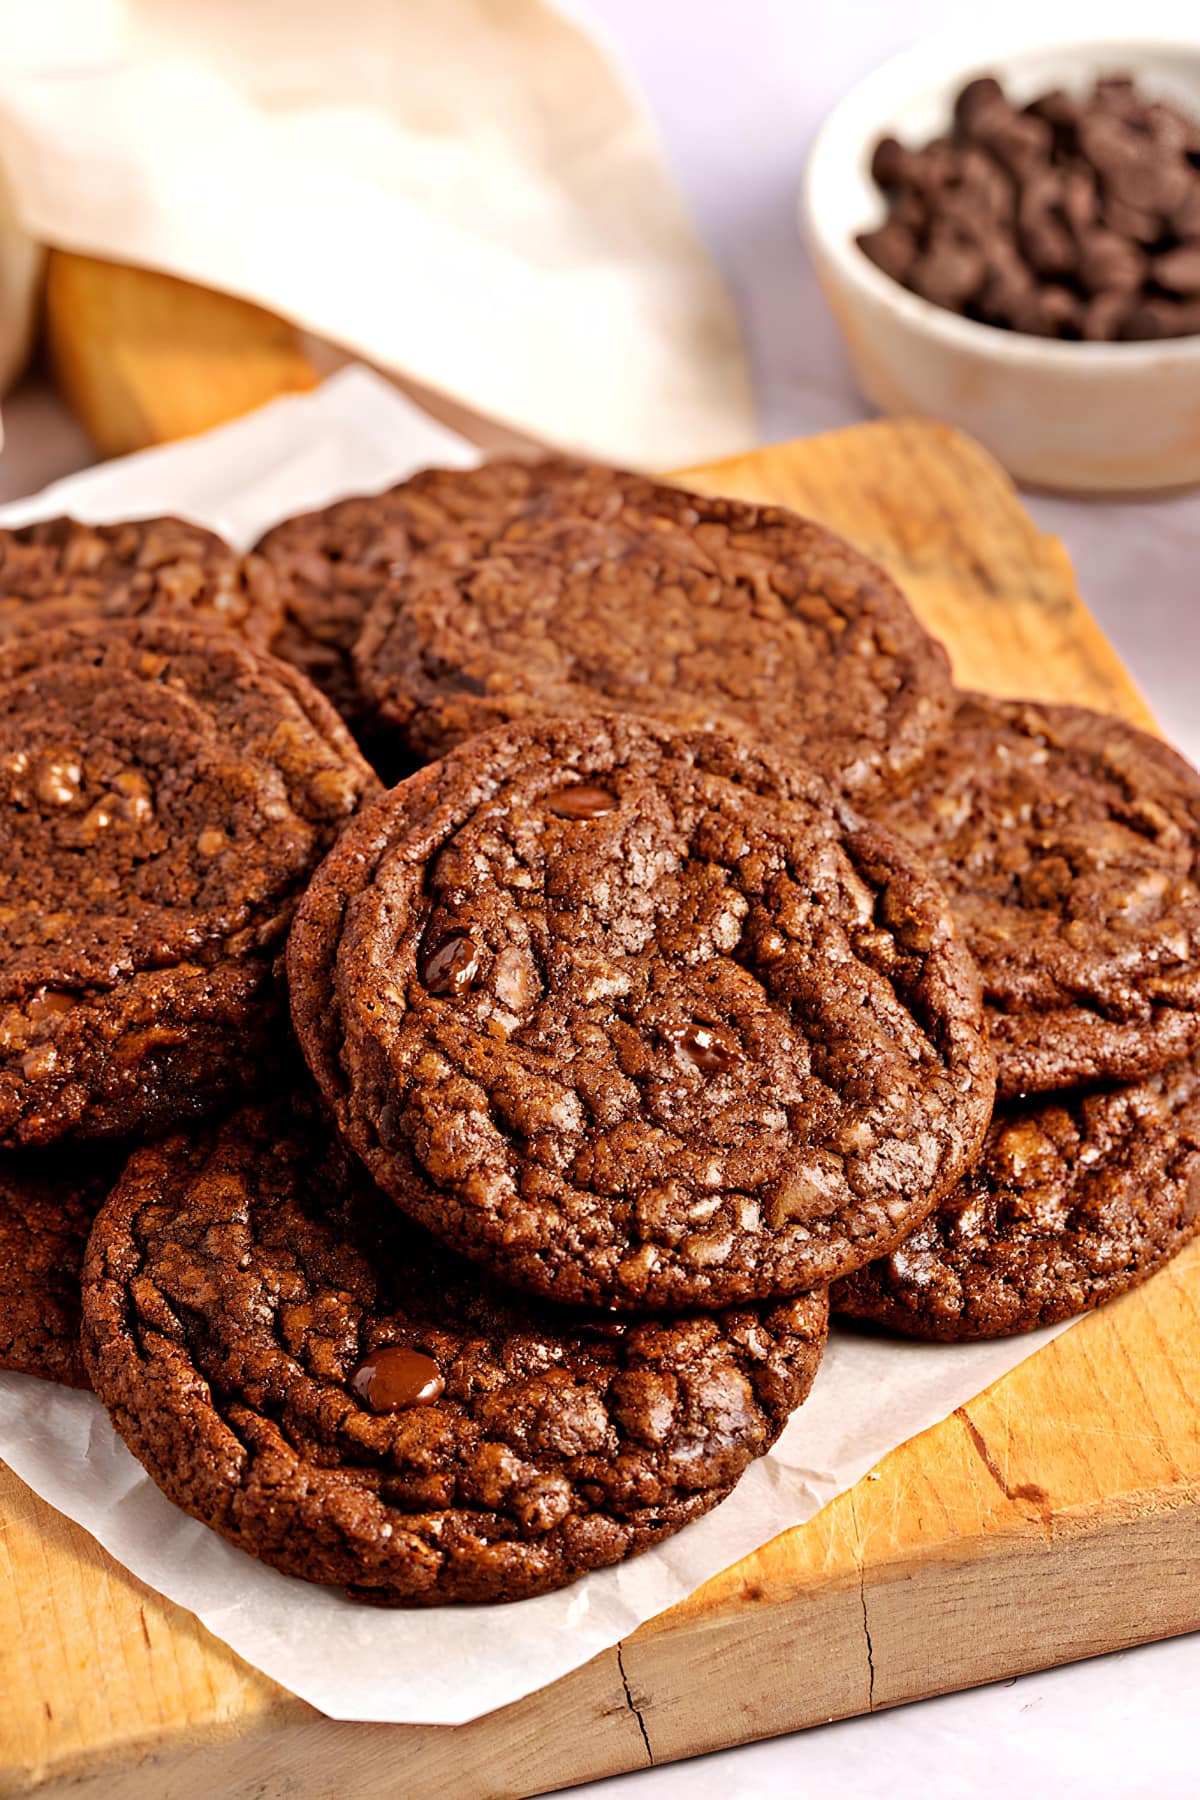 Bunch of chocolatey brownie cookies on a parchment paper on top of wooden board.